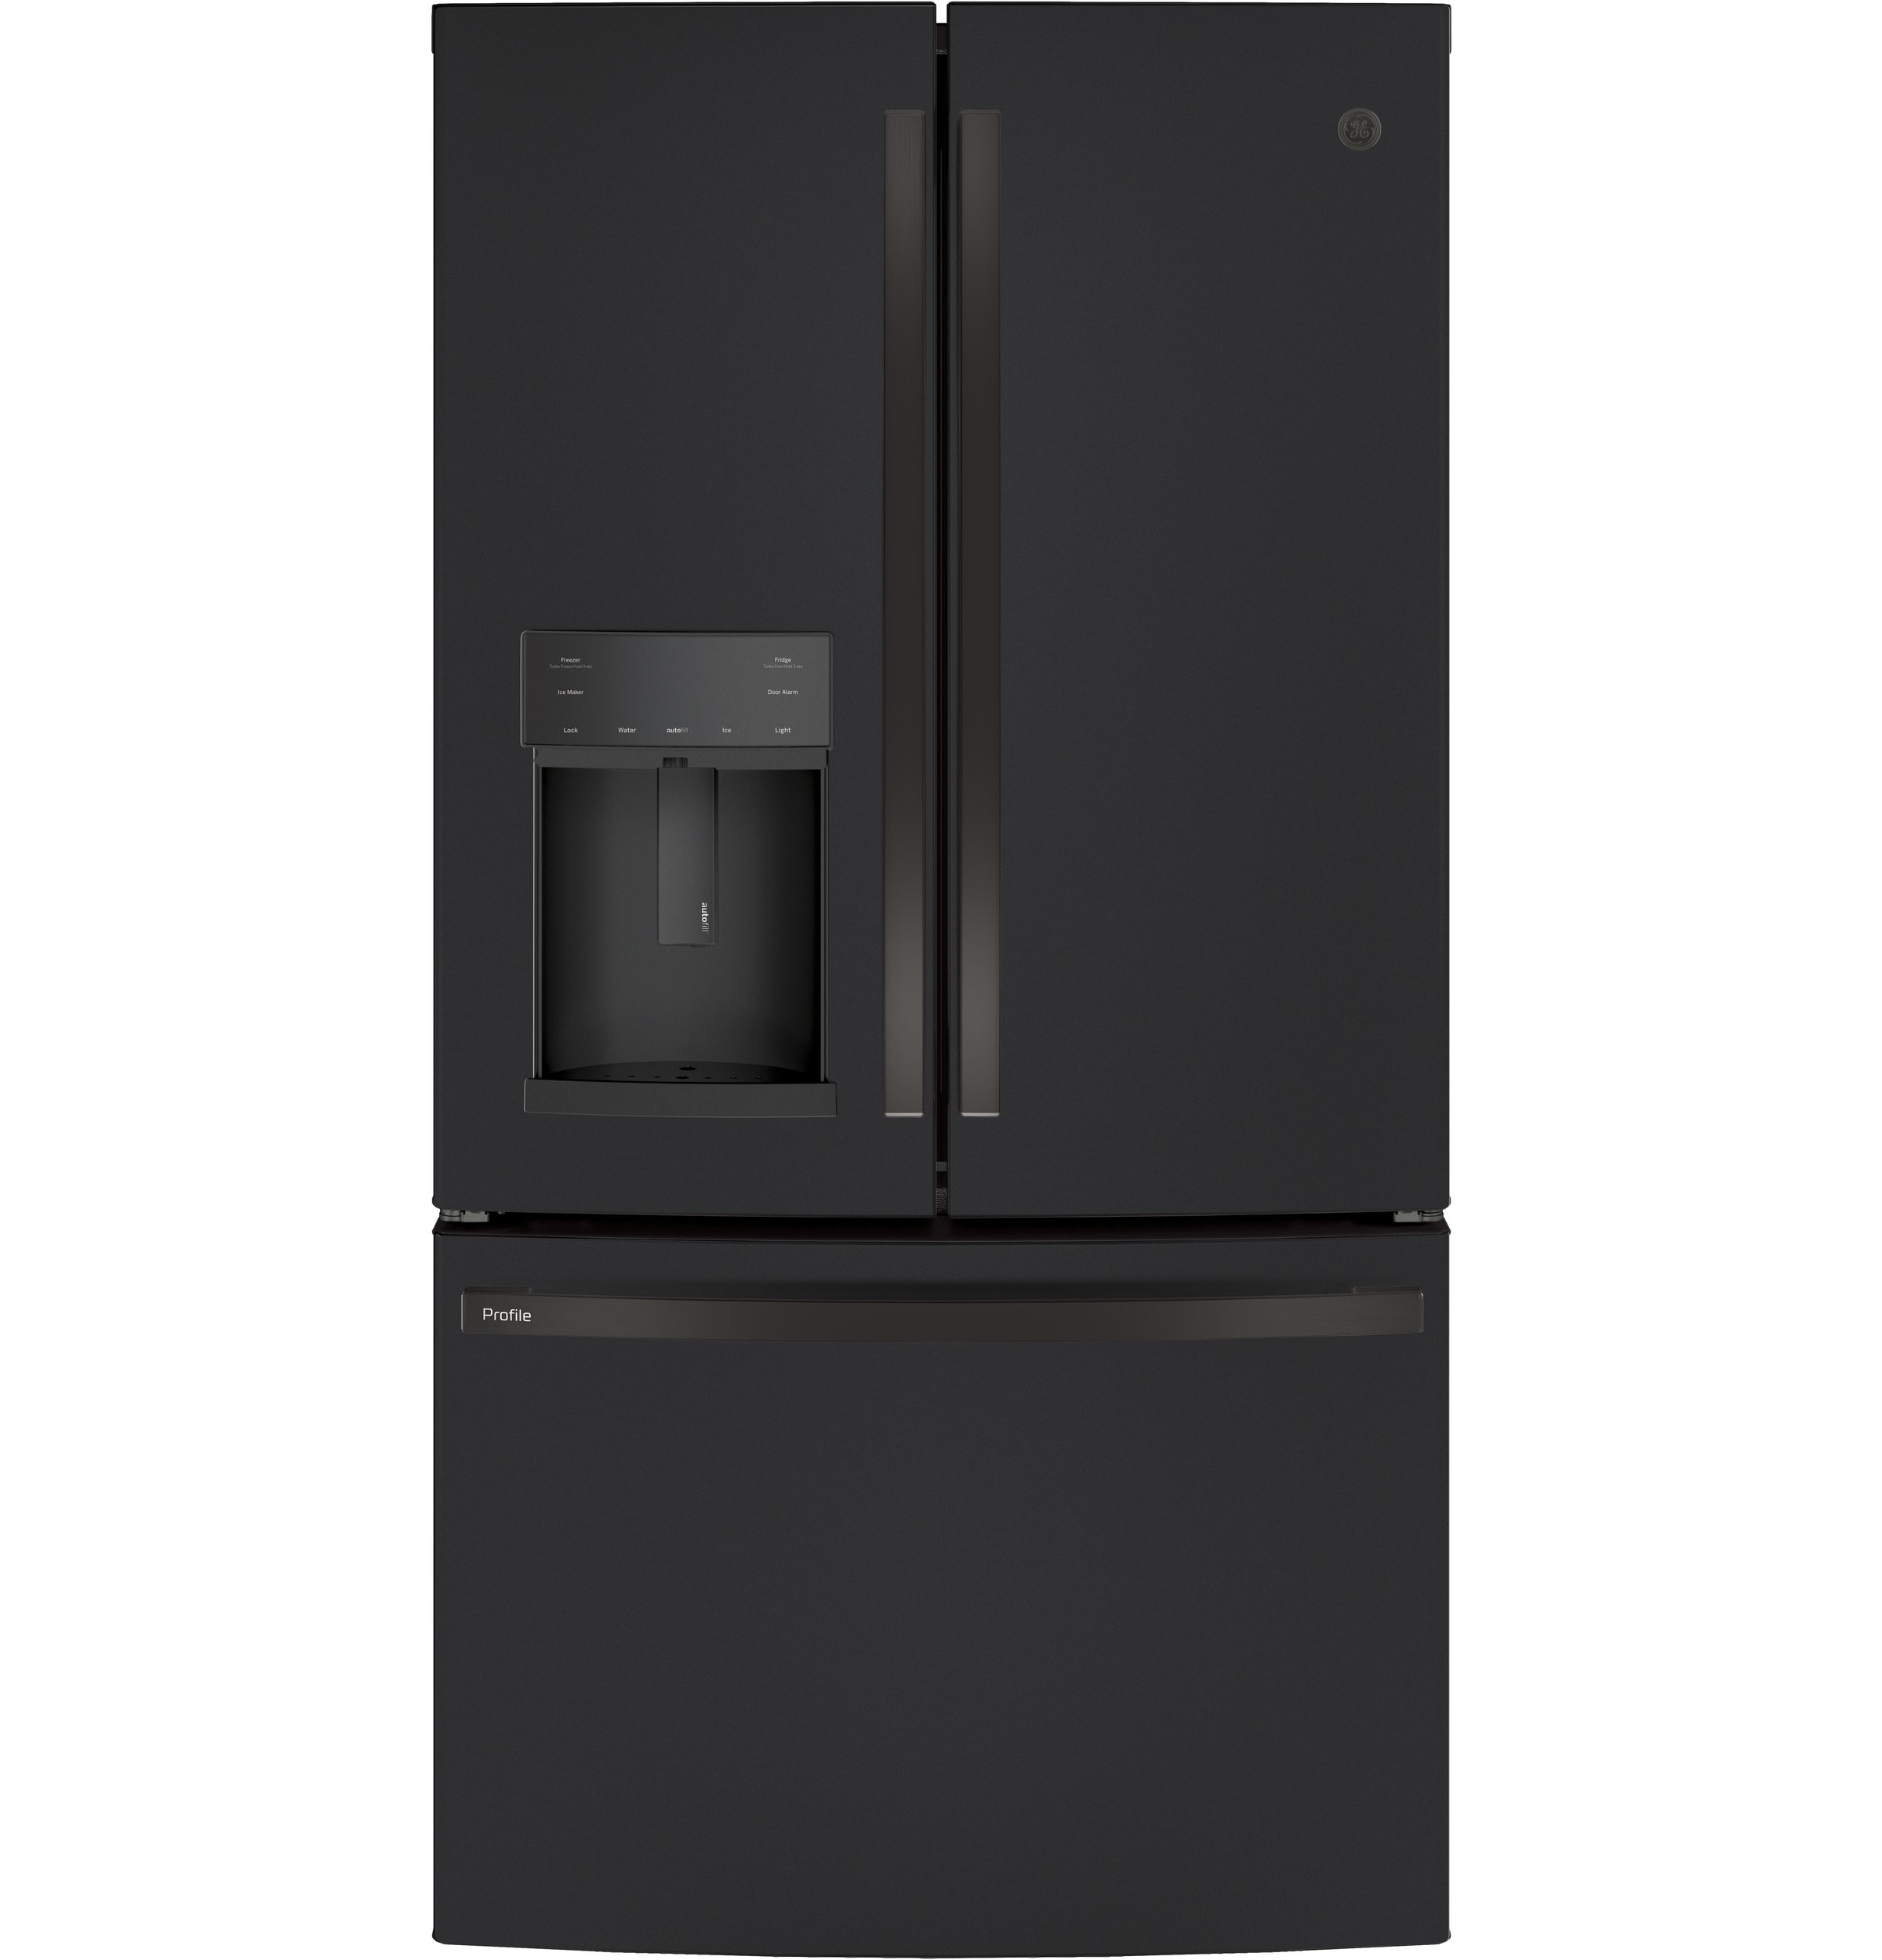 GE 25.6-cu ft French Door Refrigerator with Ice Maker (Slate